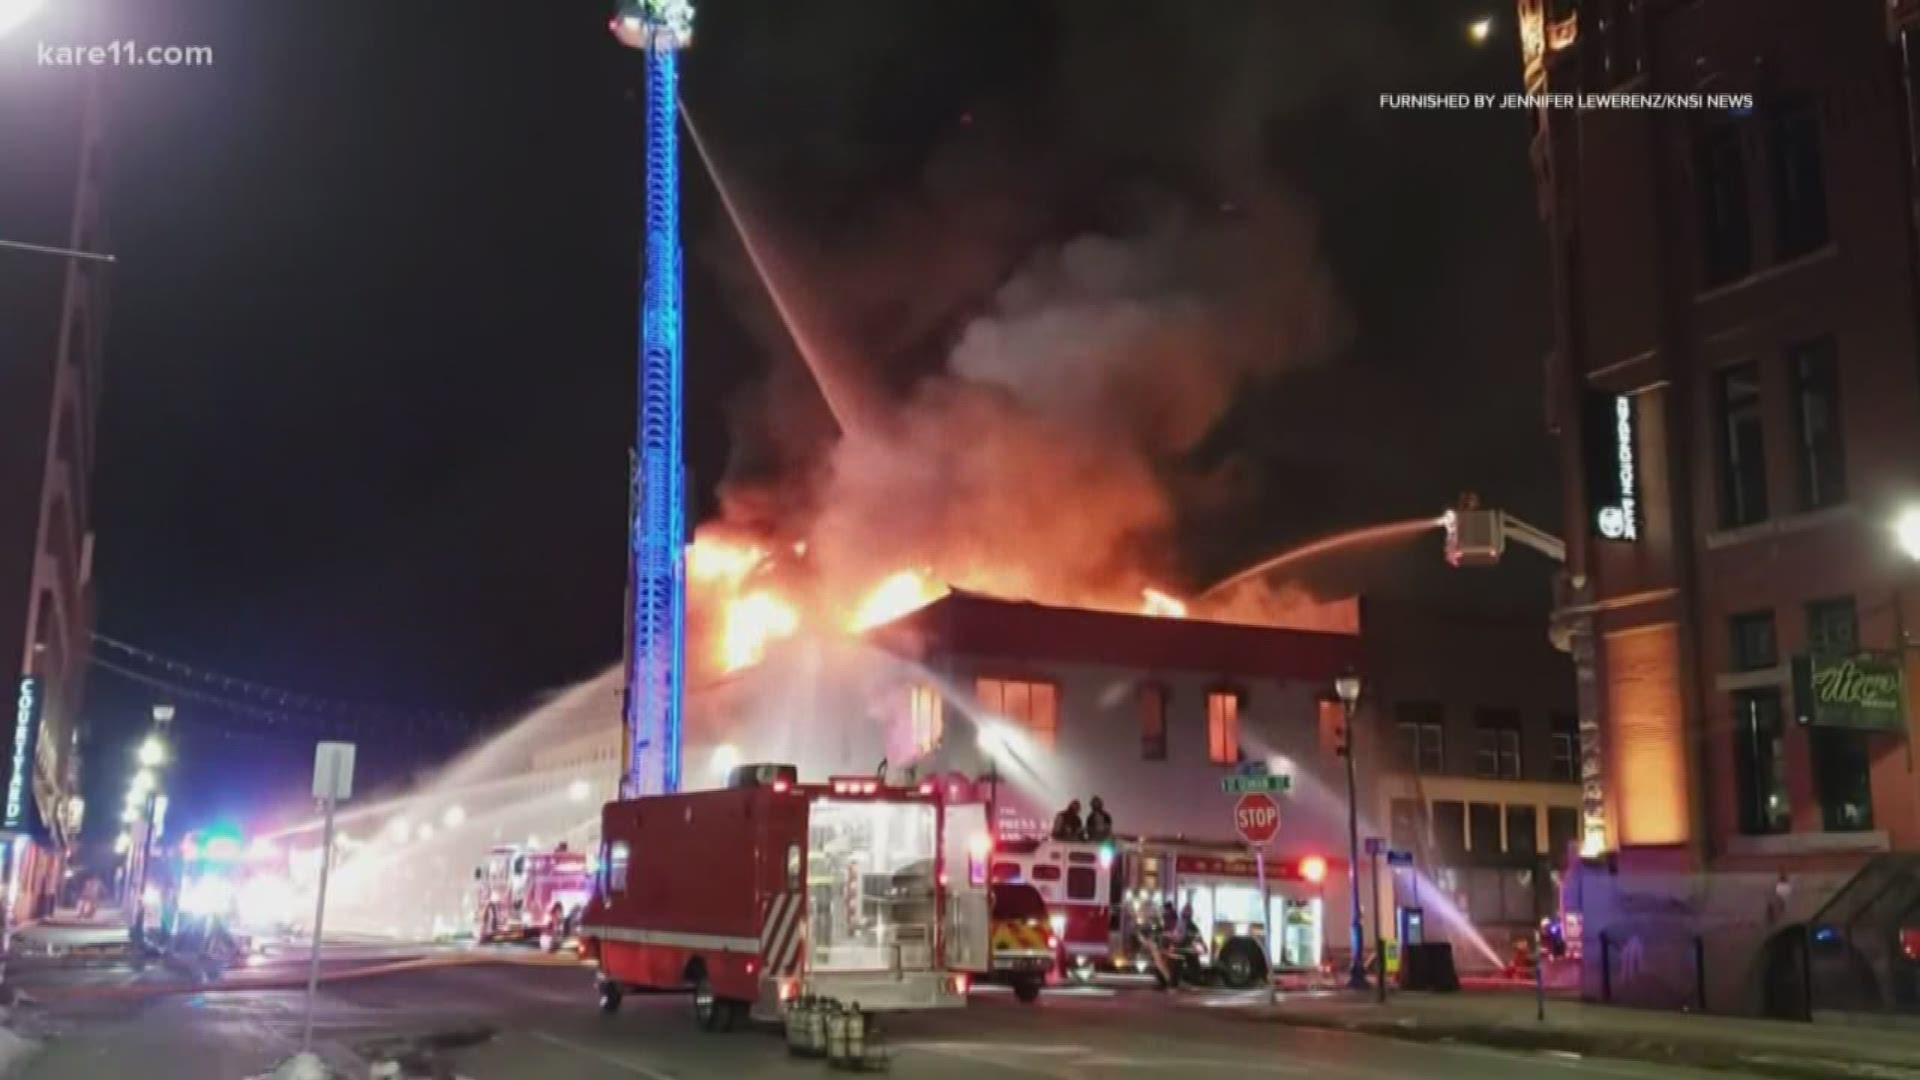 According to a press release by the ATF, several local and federal agencies have determined that the Feb. 17 Press Bar fire in St. Cloud was intentionally set.